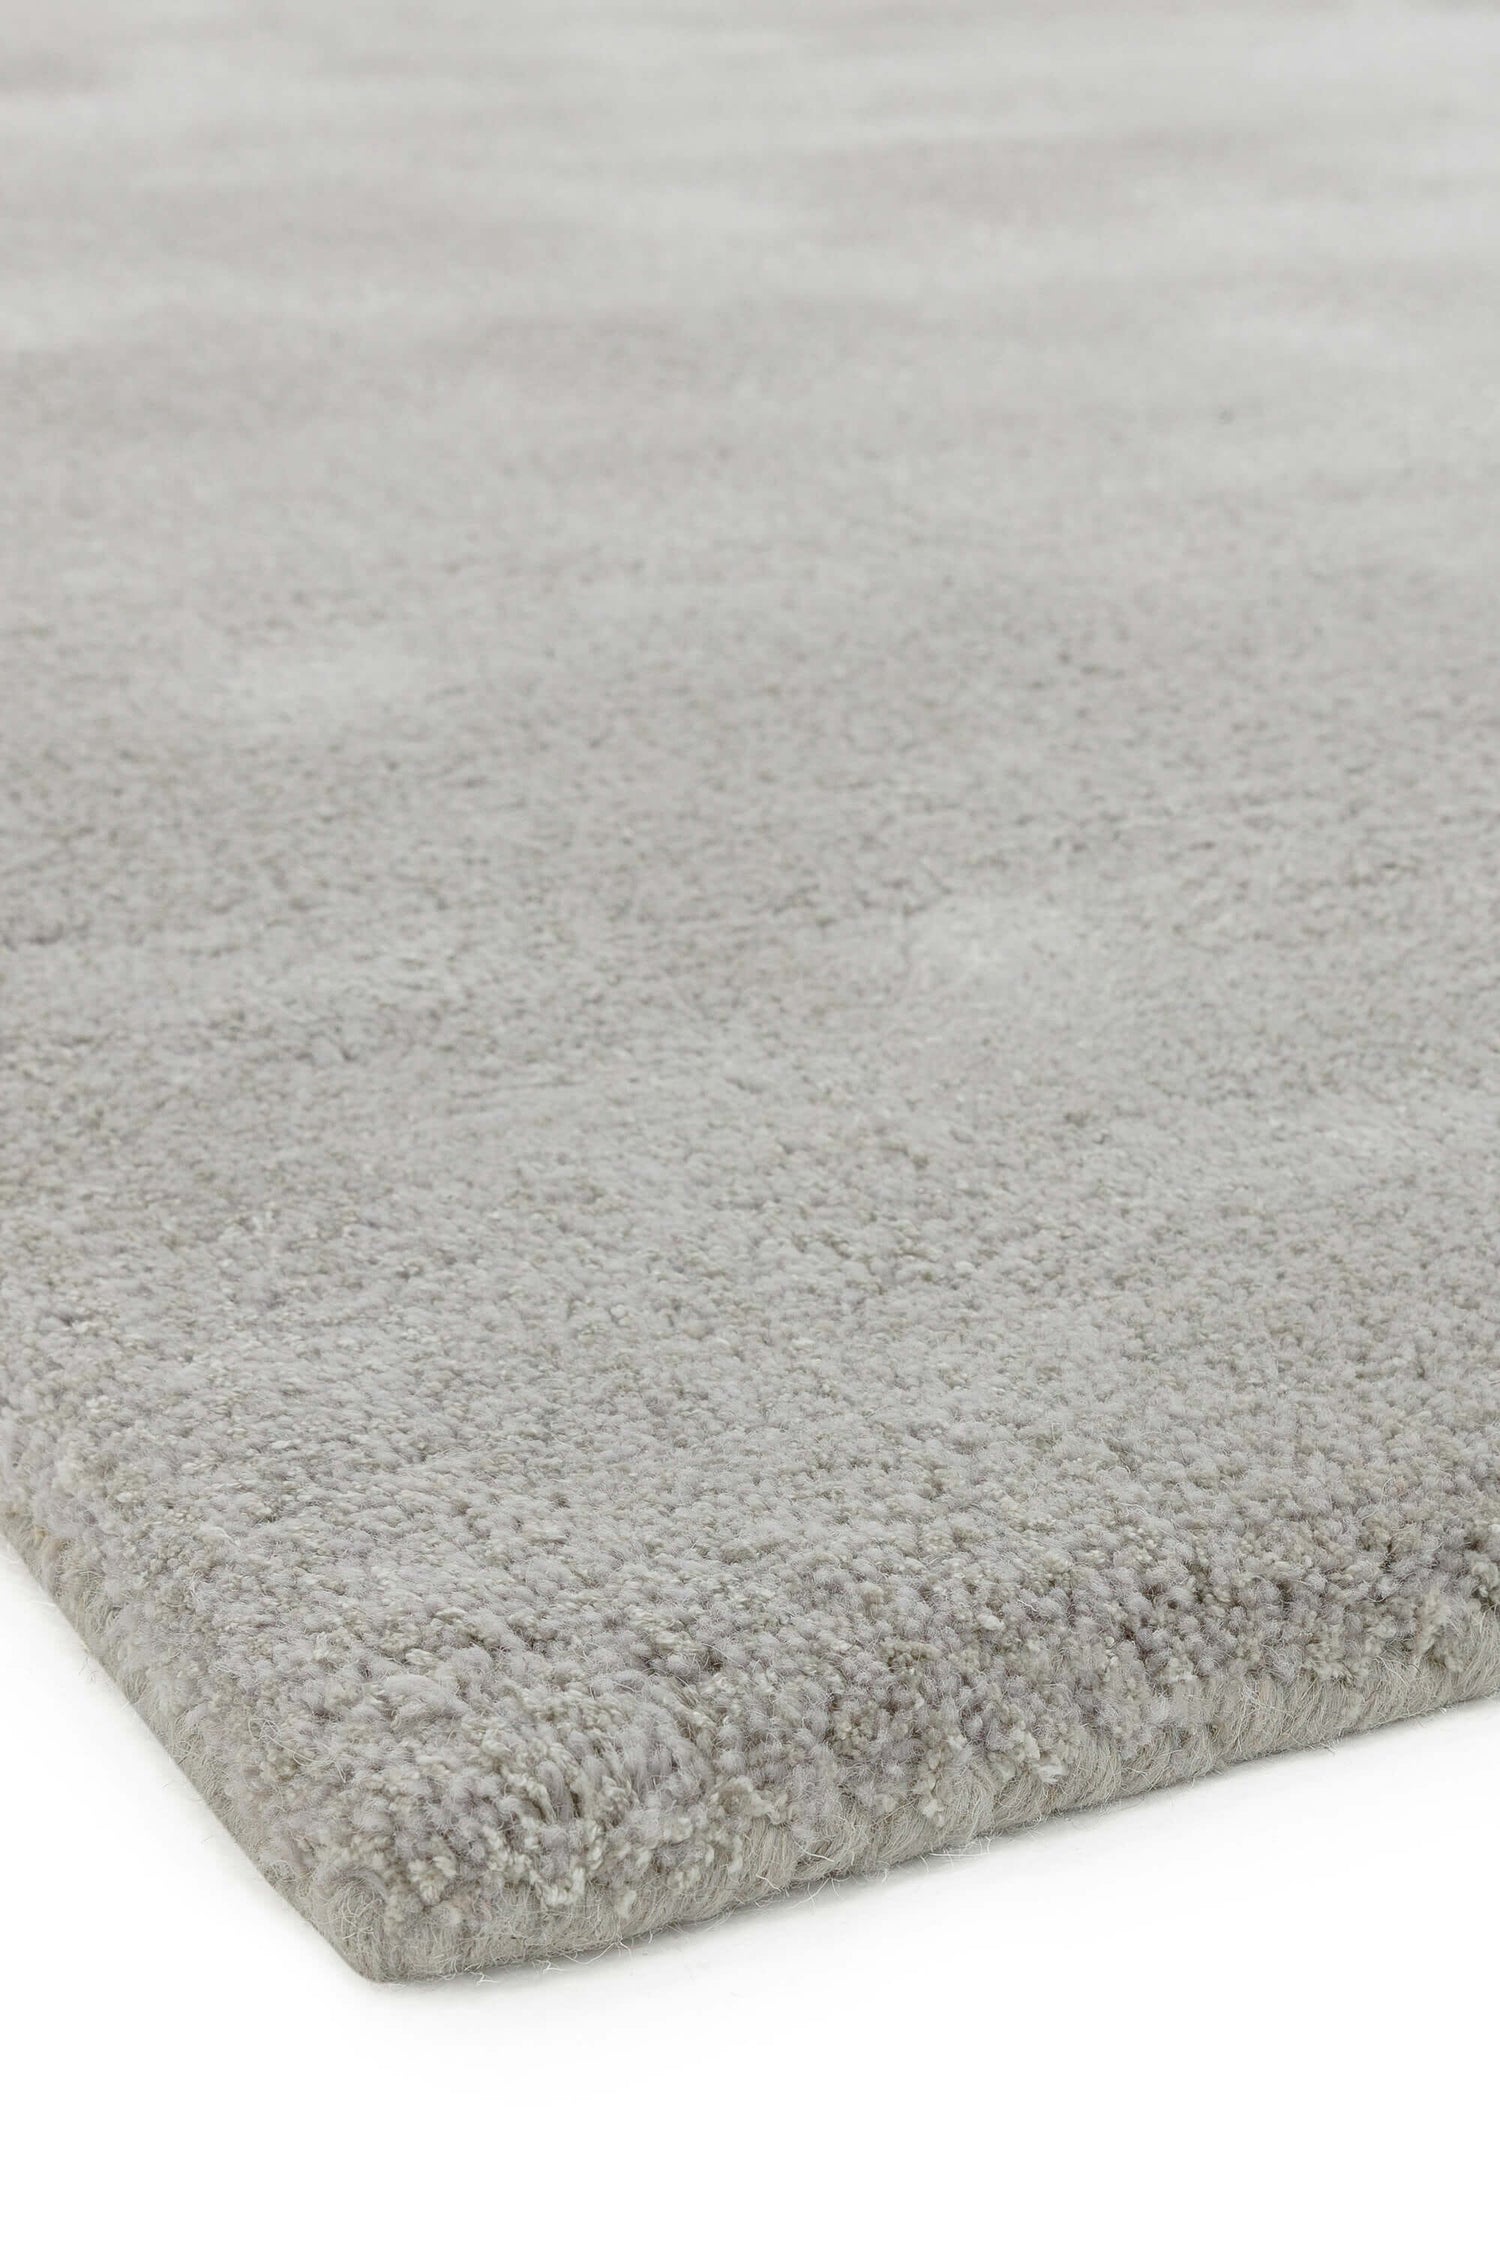  Asiatic Carpets-Asiatic Carpets Aran Hand Woven Rug Feather Grey - 160 x 230cm-Grey, Silver 301 